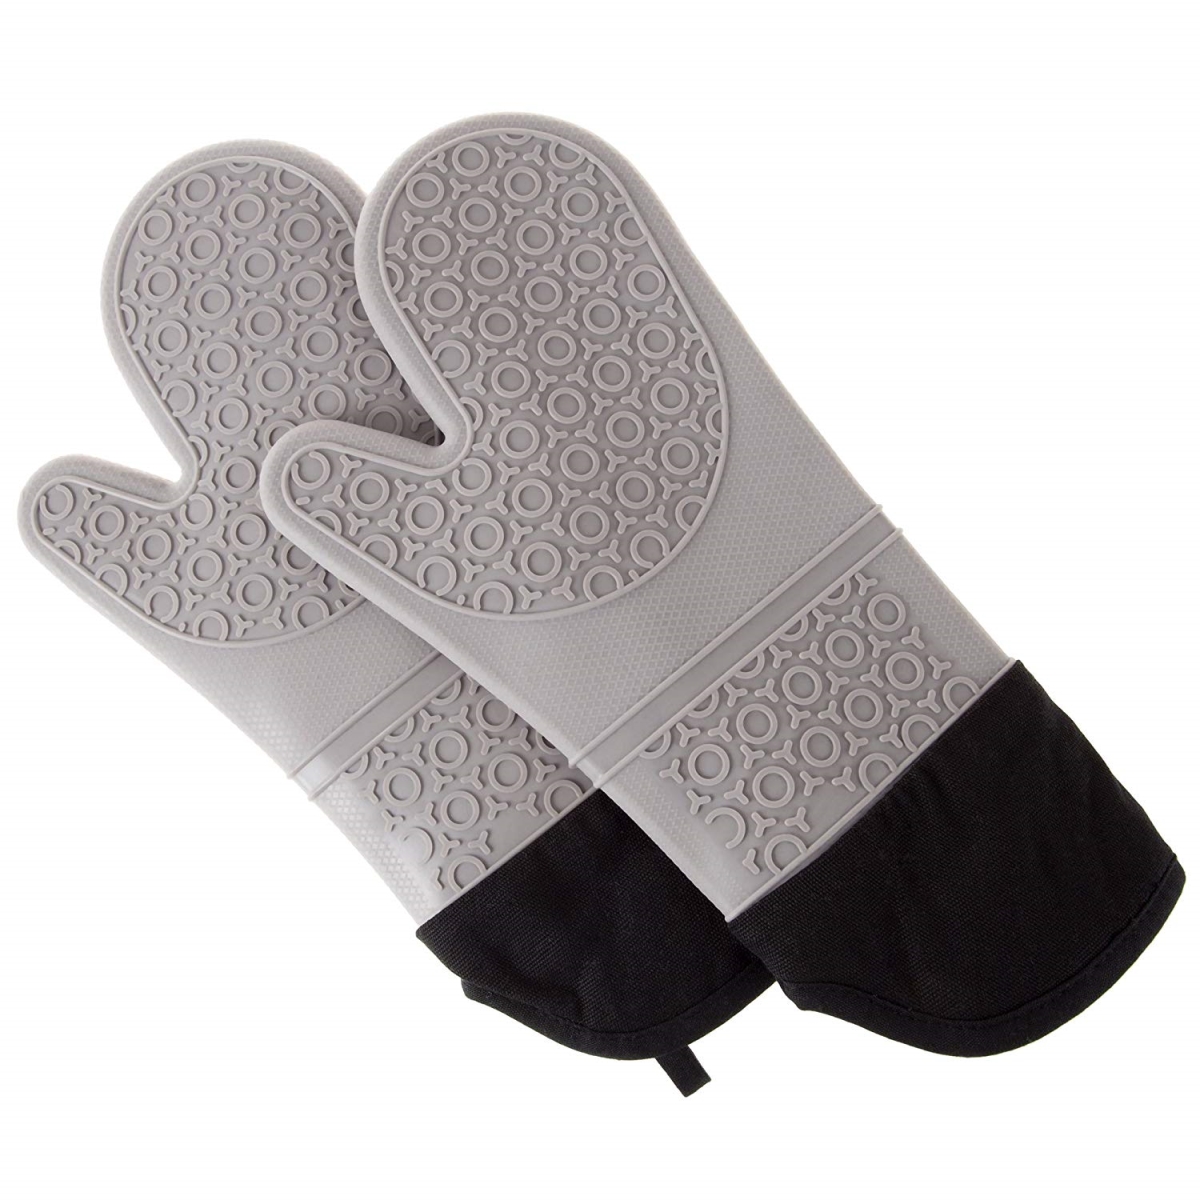 69a-64452 Silicone Oven Mitts - Grey